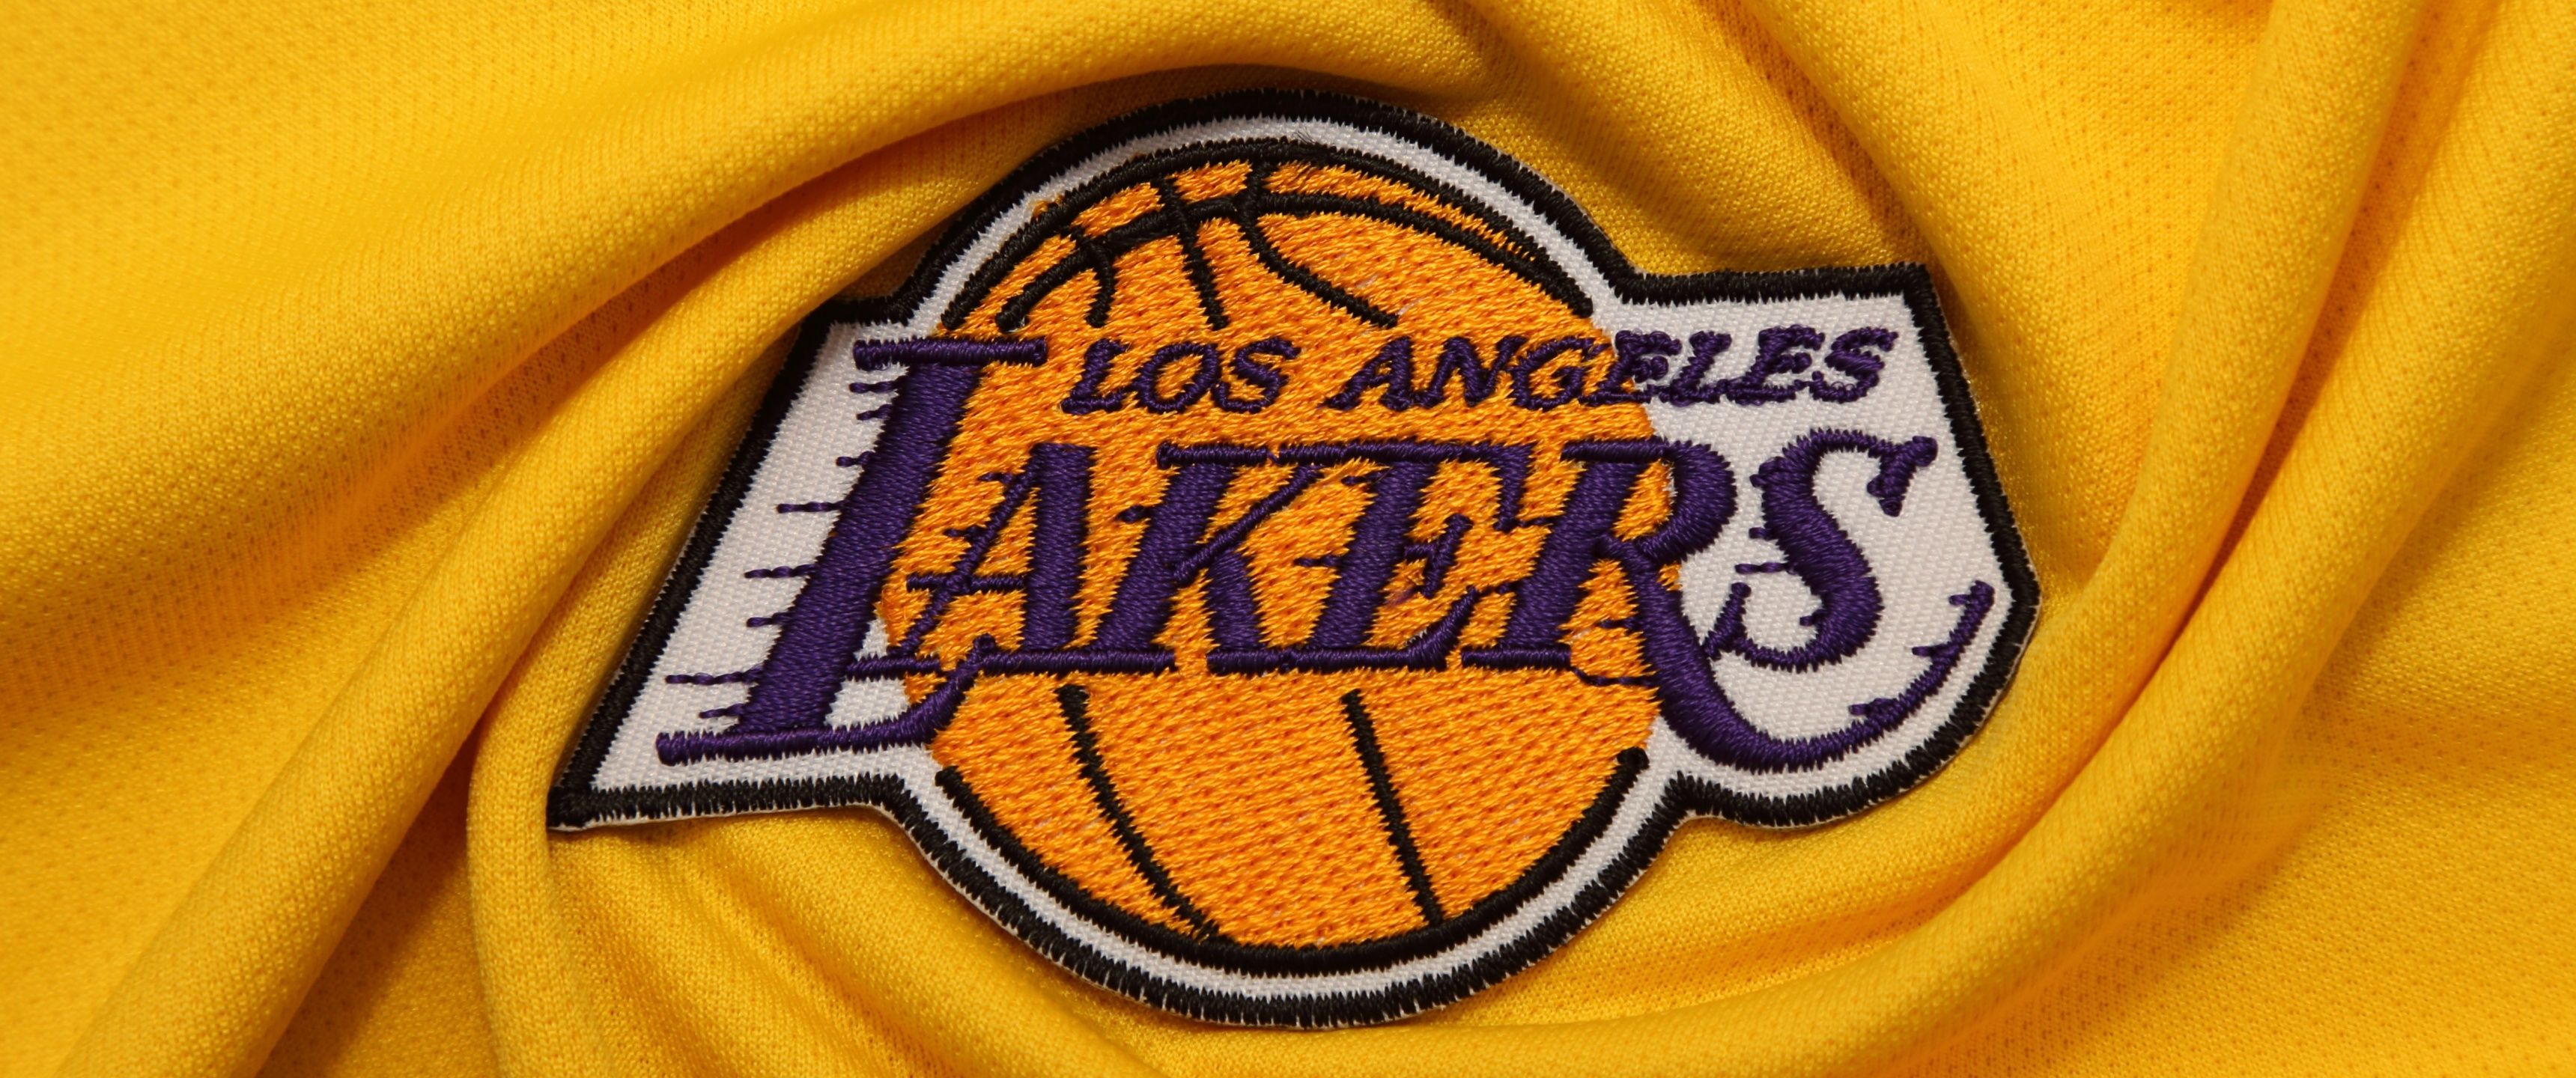 The Los Angeles Lakers logo on a yellow jersey. - Los Angeles Lakers